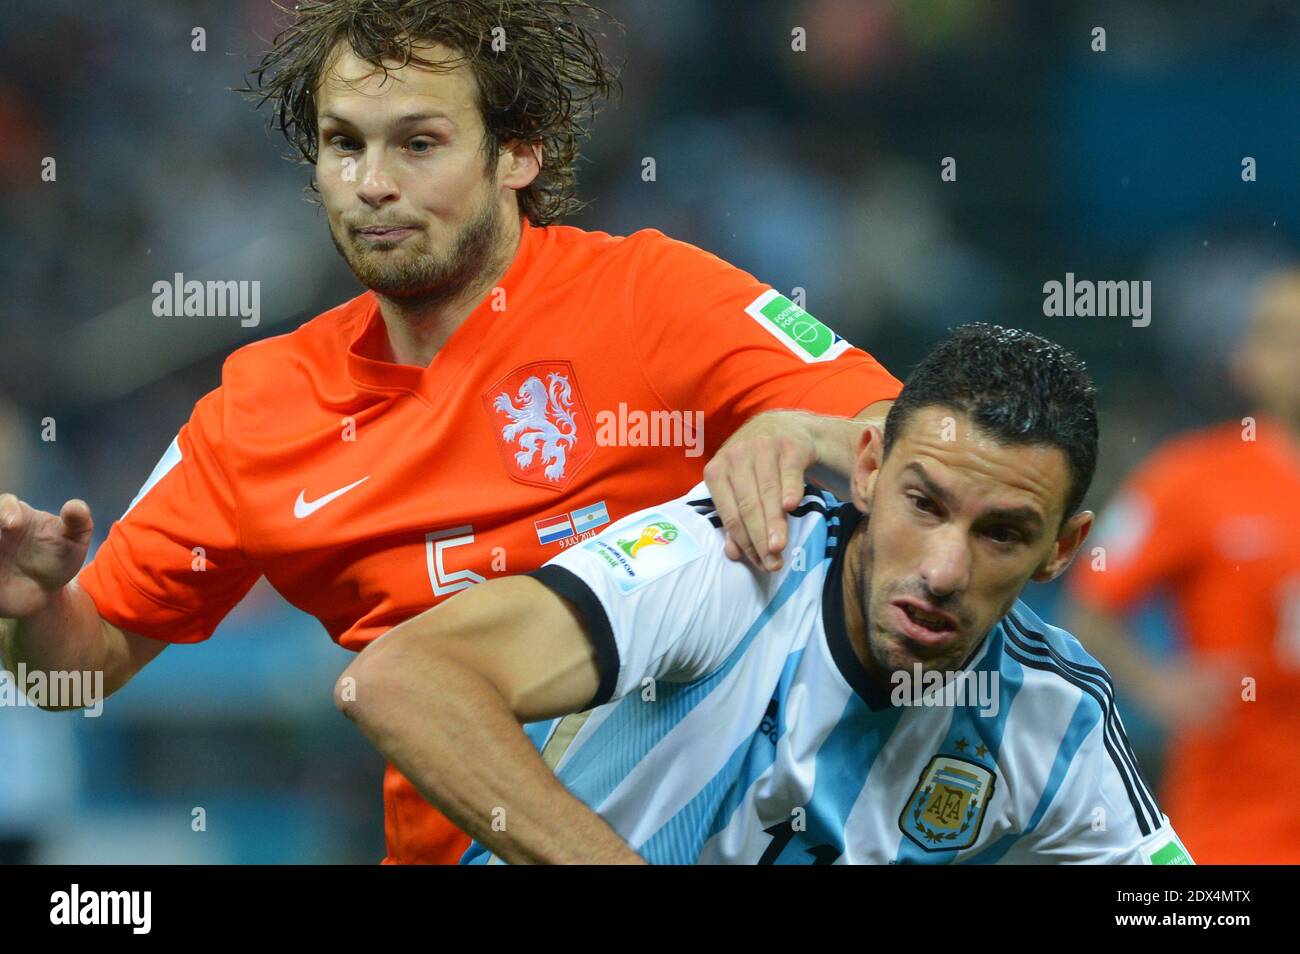 Netherlands's Daley Blind battling Argentina's Maxi Rodriguez during Soccer World Cup Semi Final match Netherlands v Argentina at Itaquera Stadium, Sao Paulo, Brazil on July 9, 2014. Argentina won on the penalty shoot-out 5-3 after a 0-0 score. Photo by Henri Szwarc/ABACAPRESS.COM Stock Photo